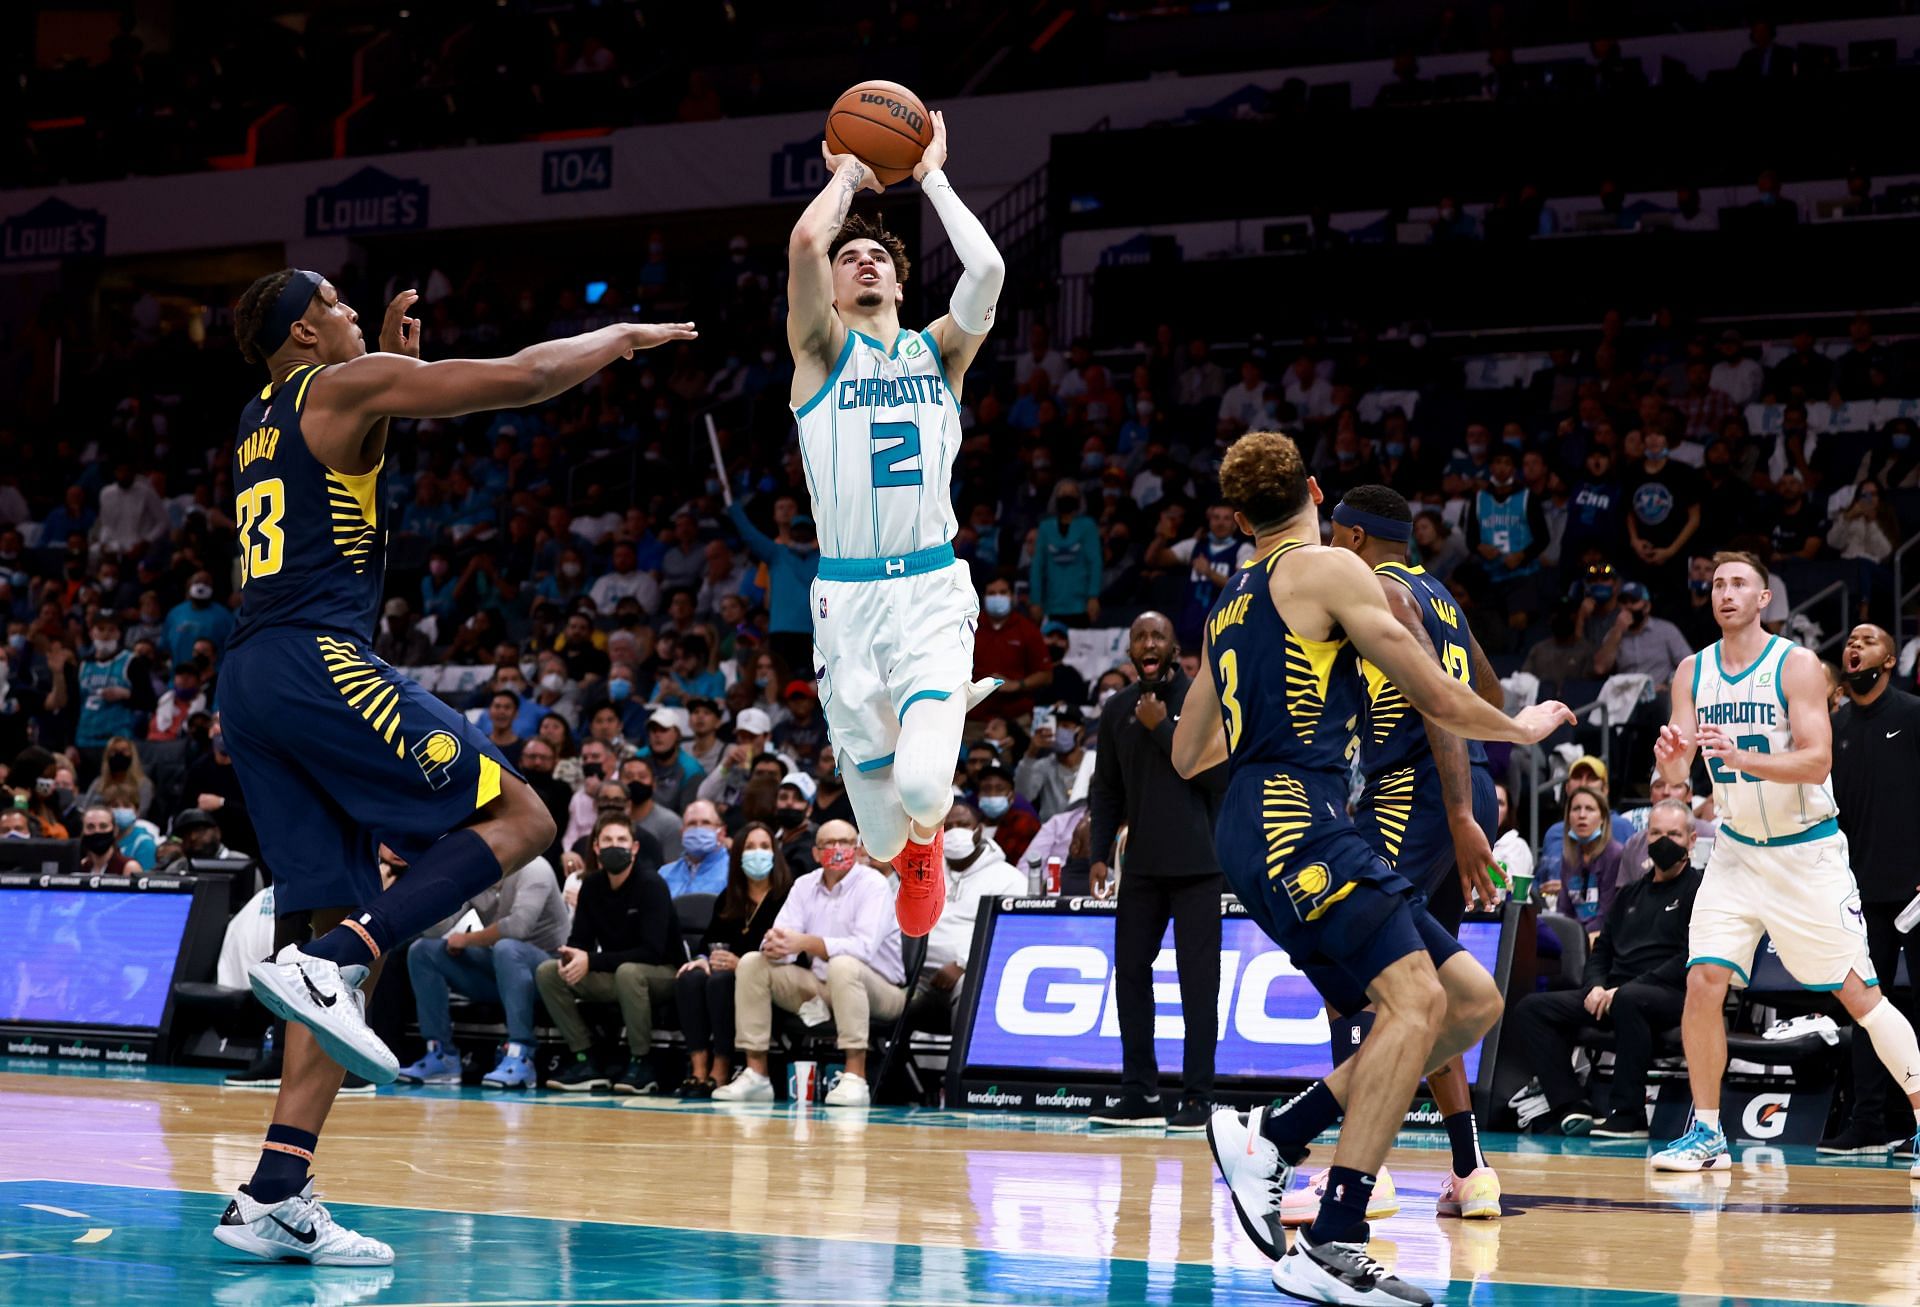 The Charlotte Hornets will host the Indiana Pacers on November 19th